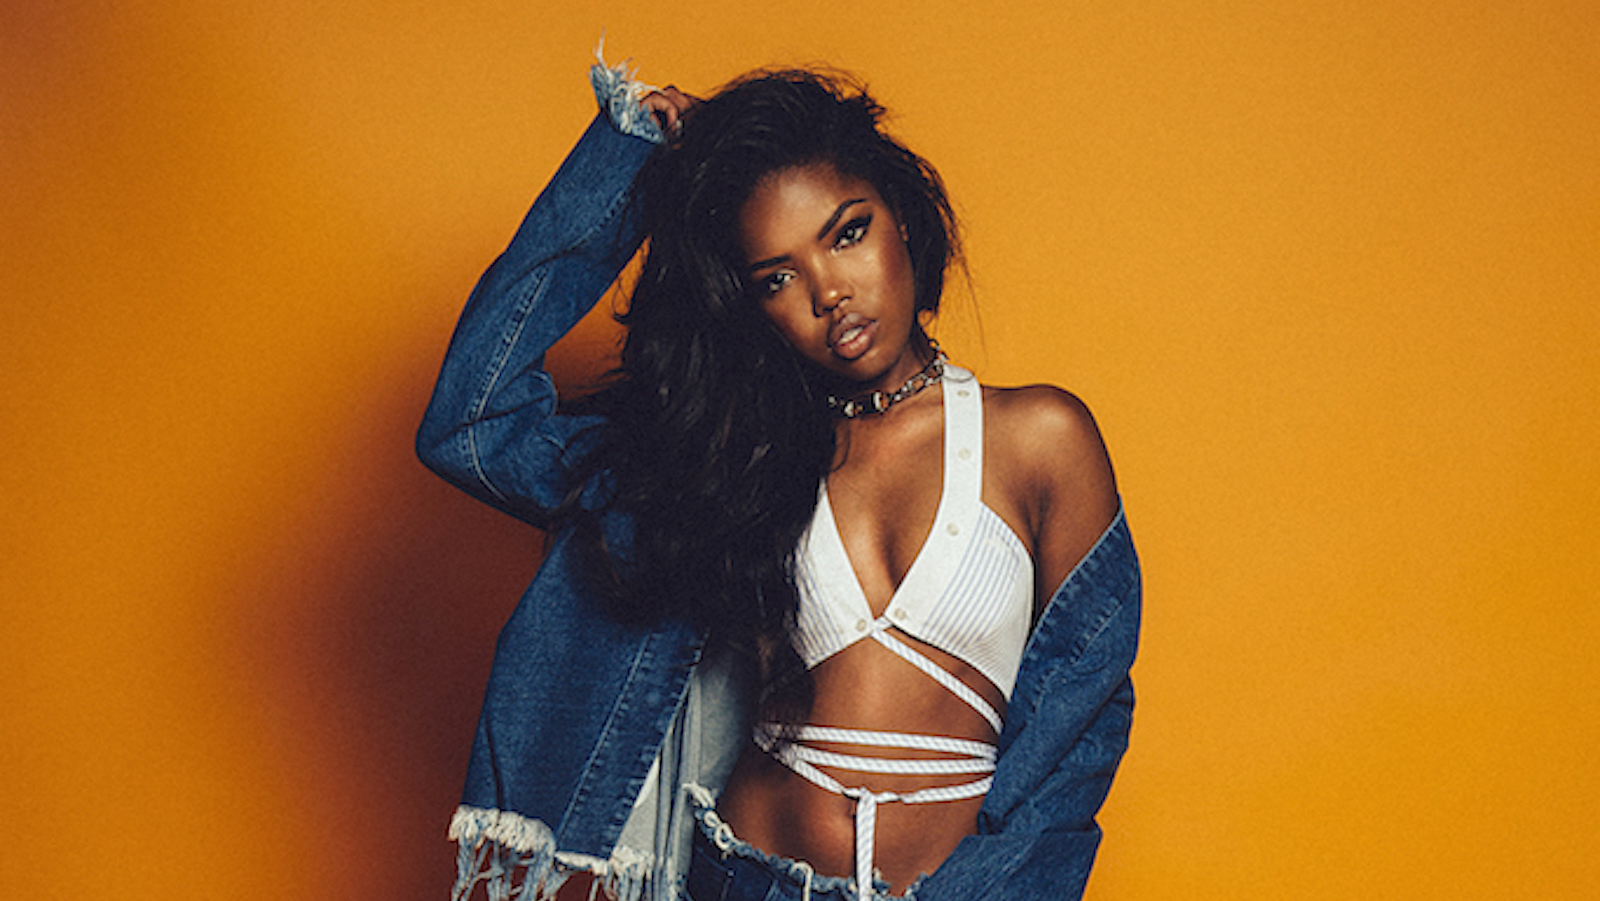 Ryan destiny is killing it in our favorite spring trends